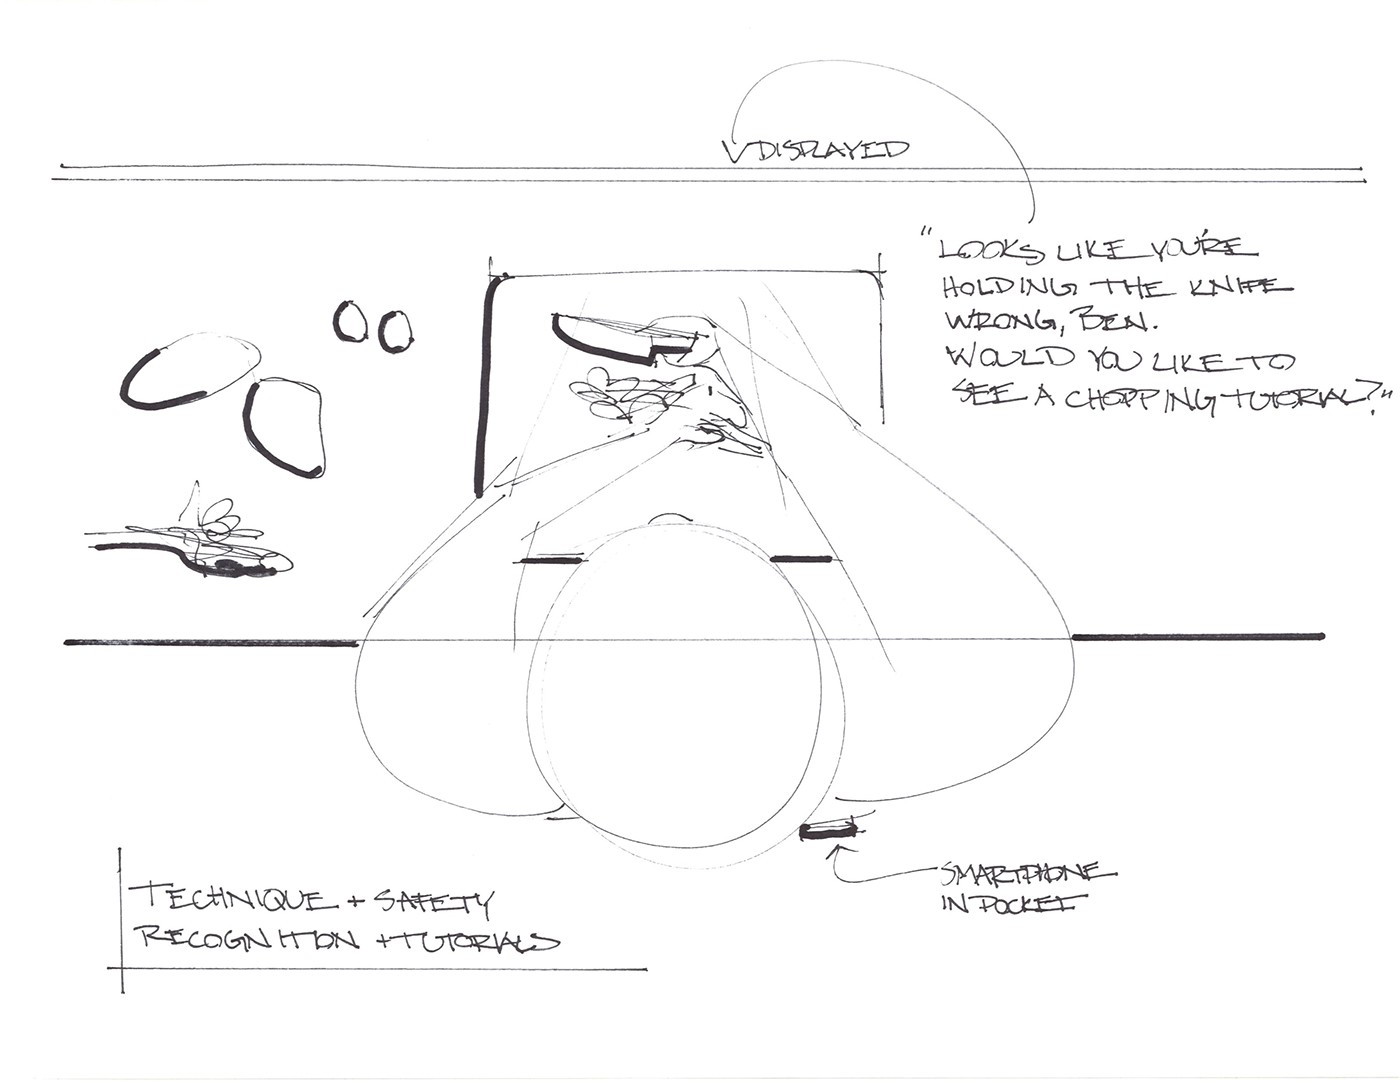 sketch concept development social cooking meal prep projection Visual Recognition gesture Inductive instructional